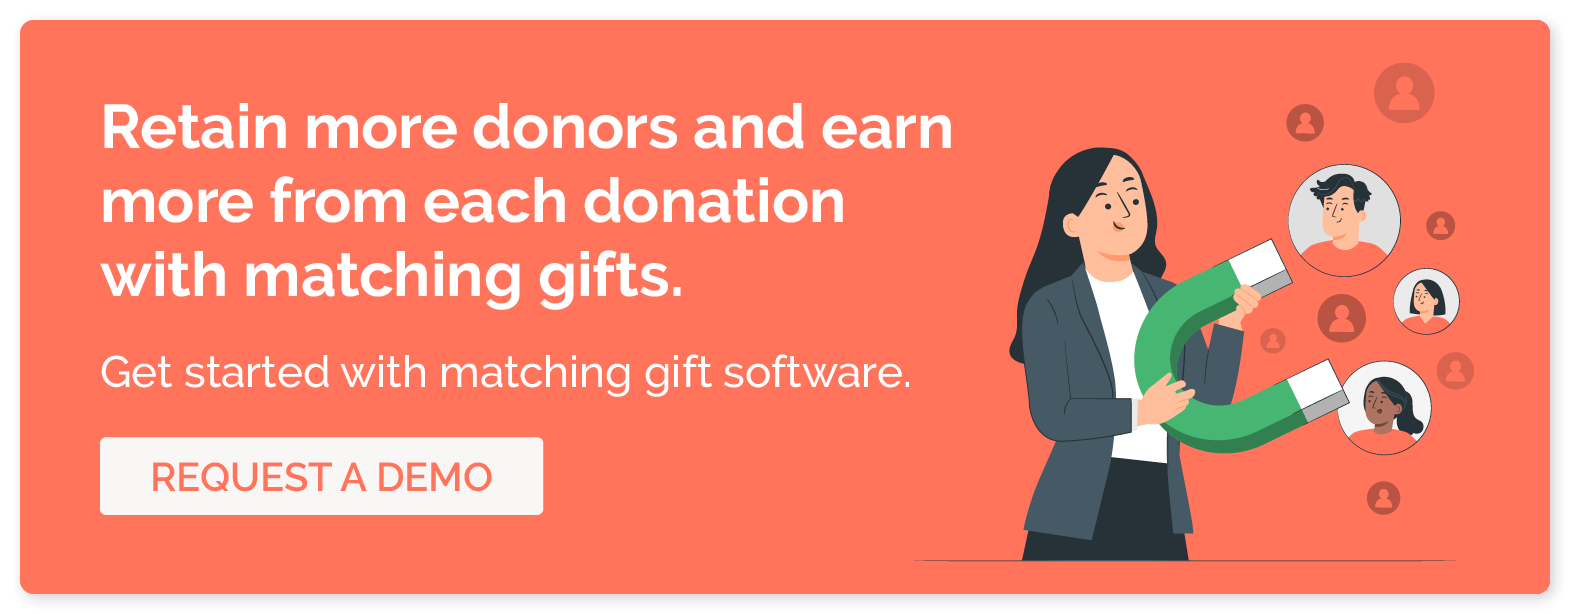 Retain more donors and earn more from each donation with matching gifts. Get started with matching gift software. Request a demo.